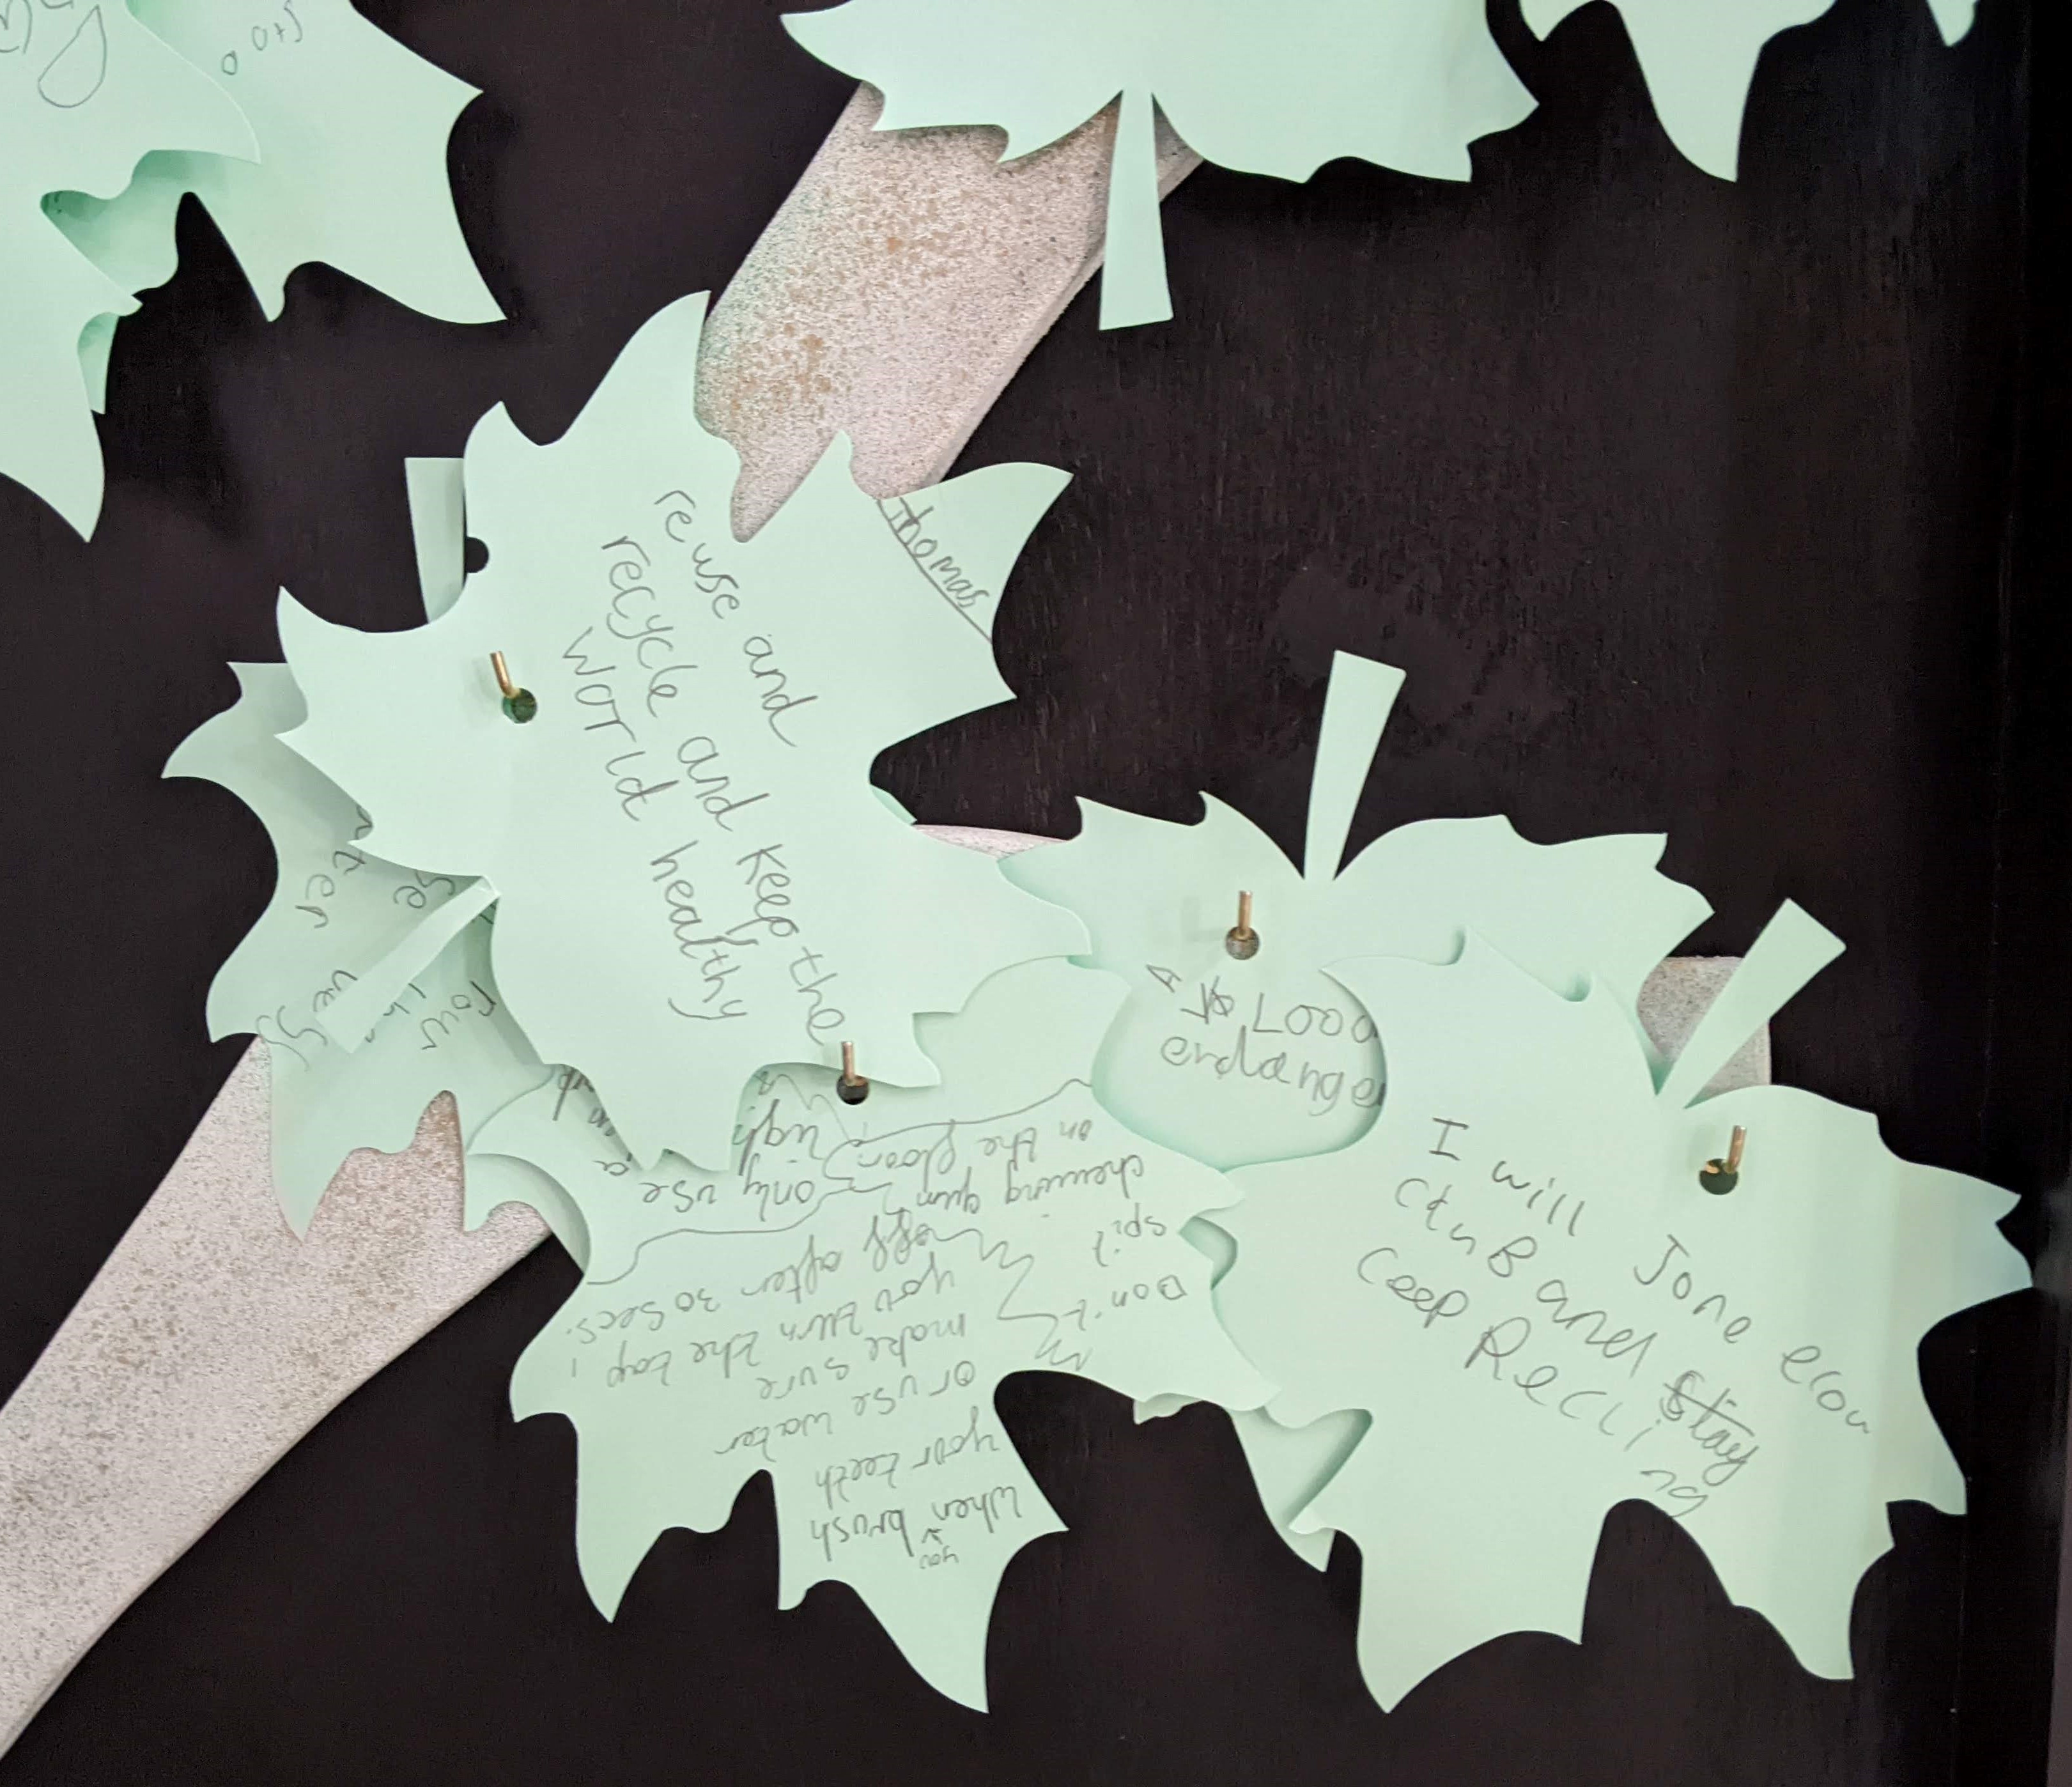 Paper leaves with pledges written on them